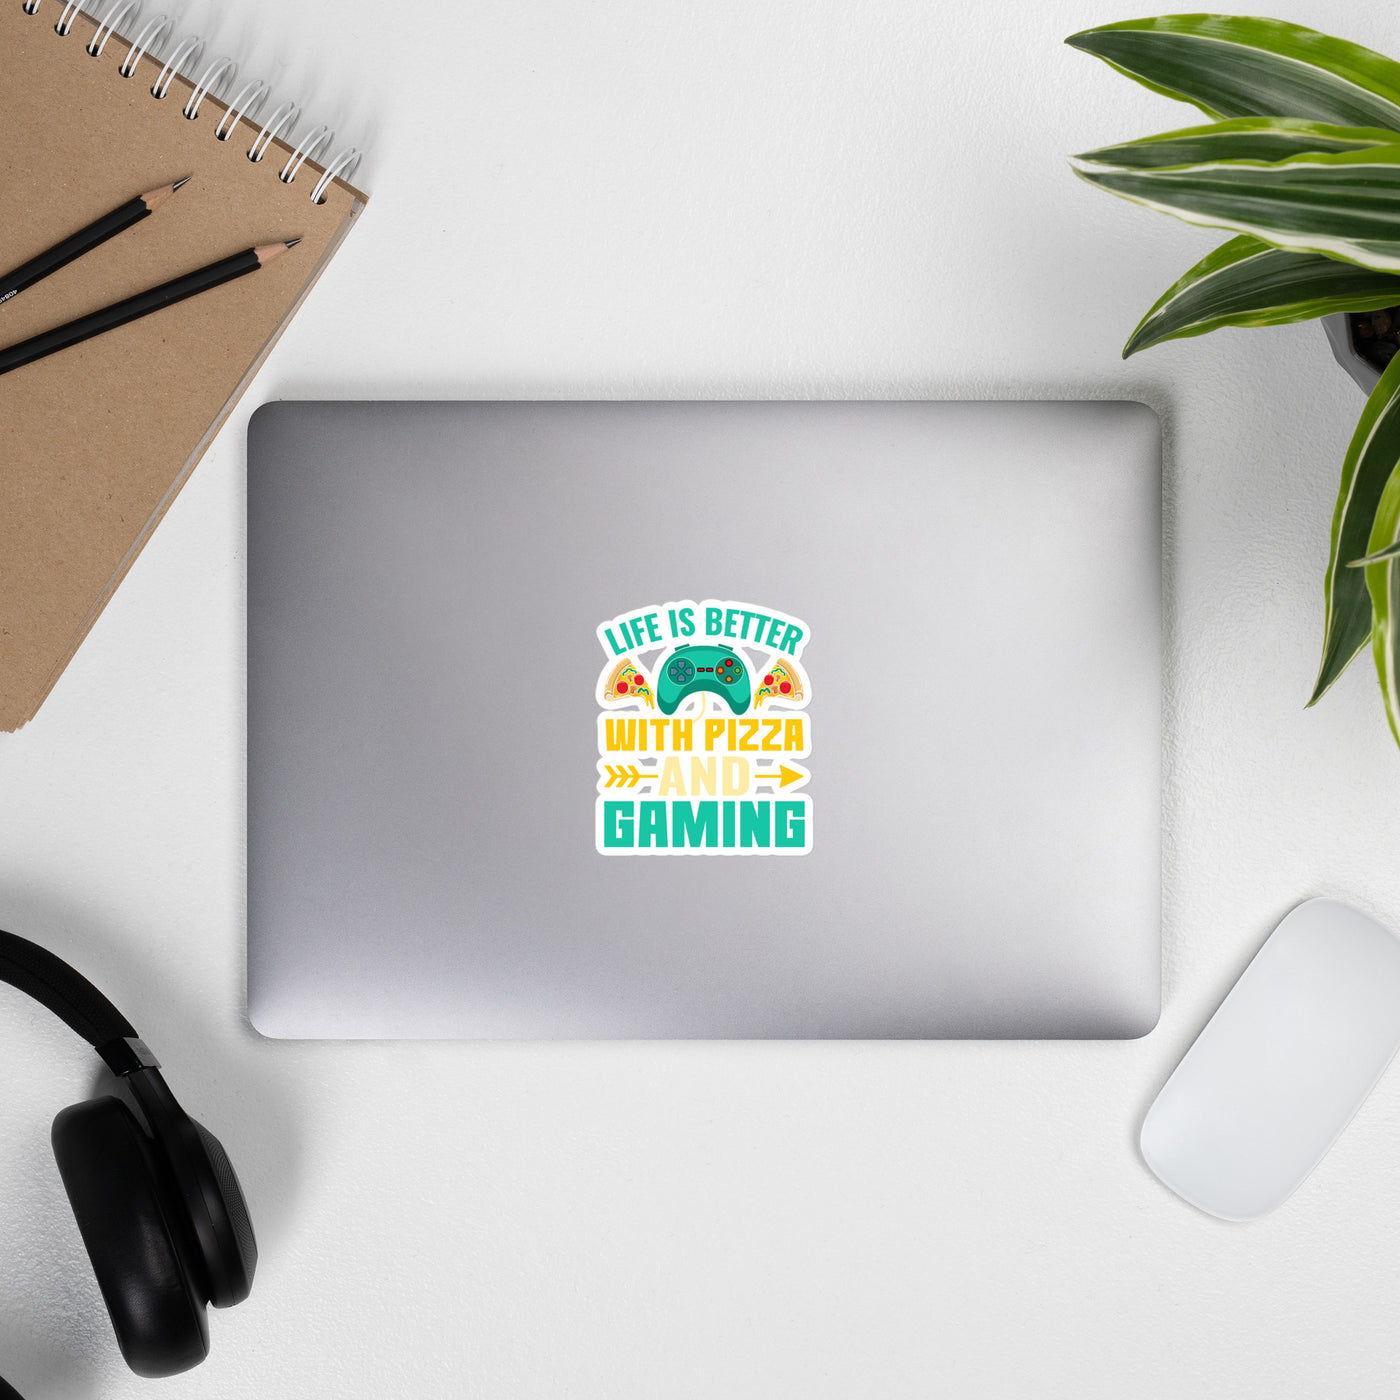 Life is Better With Pizza and Gaming Rima 14 - Bubble-free stickers